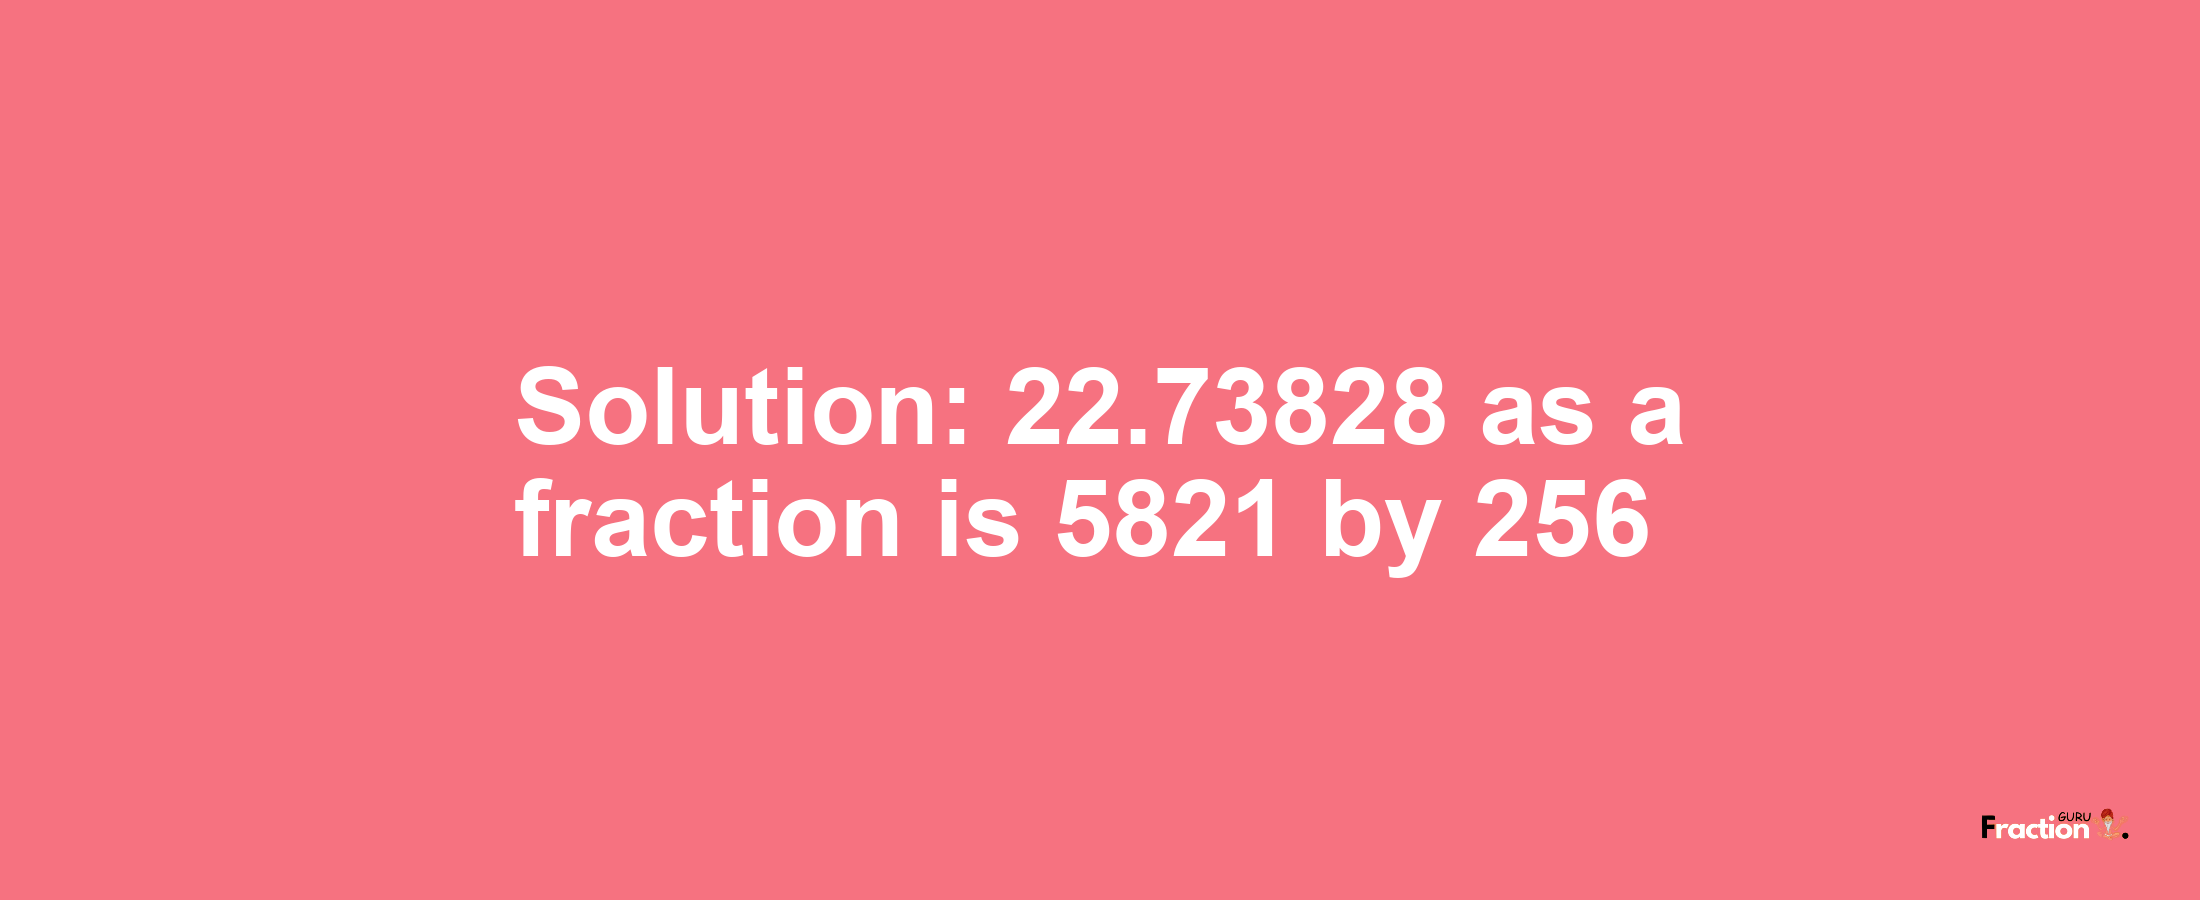 Solution:22.73828 as a fraction is 5821/256